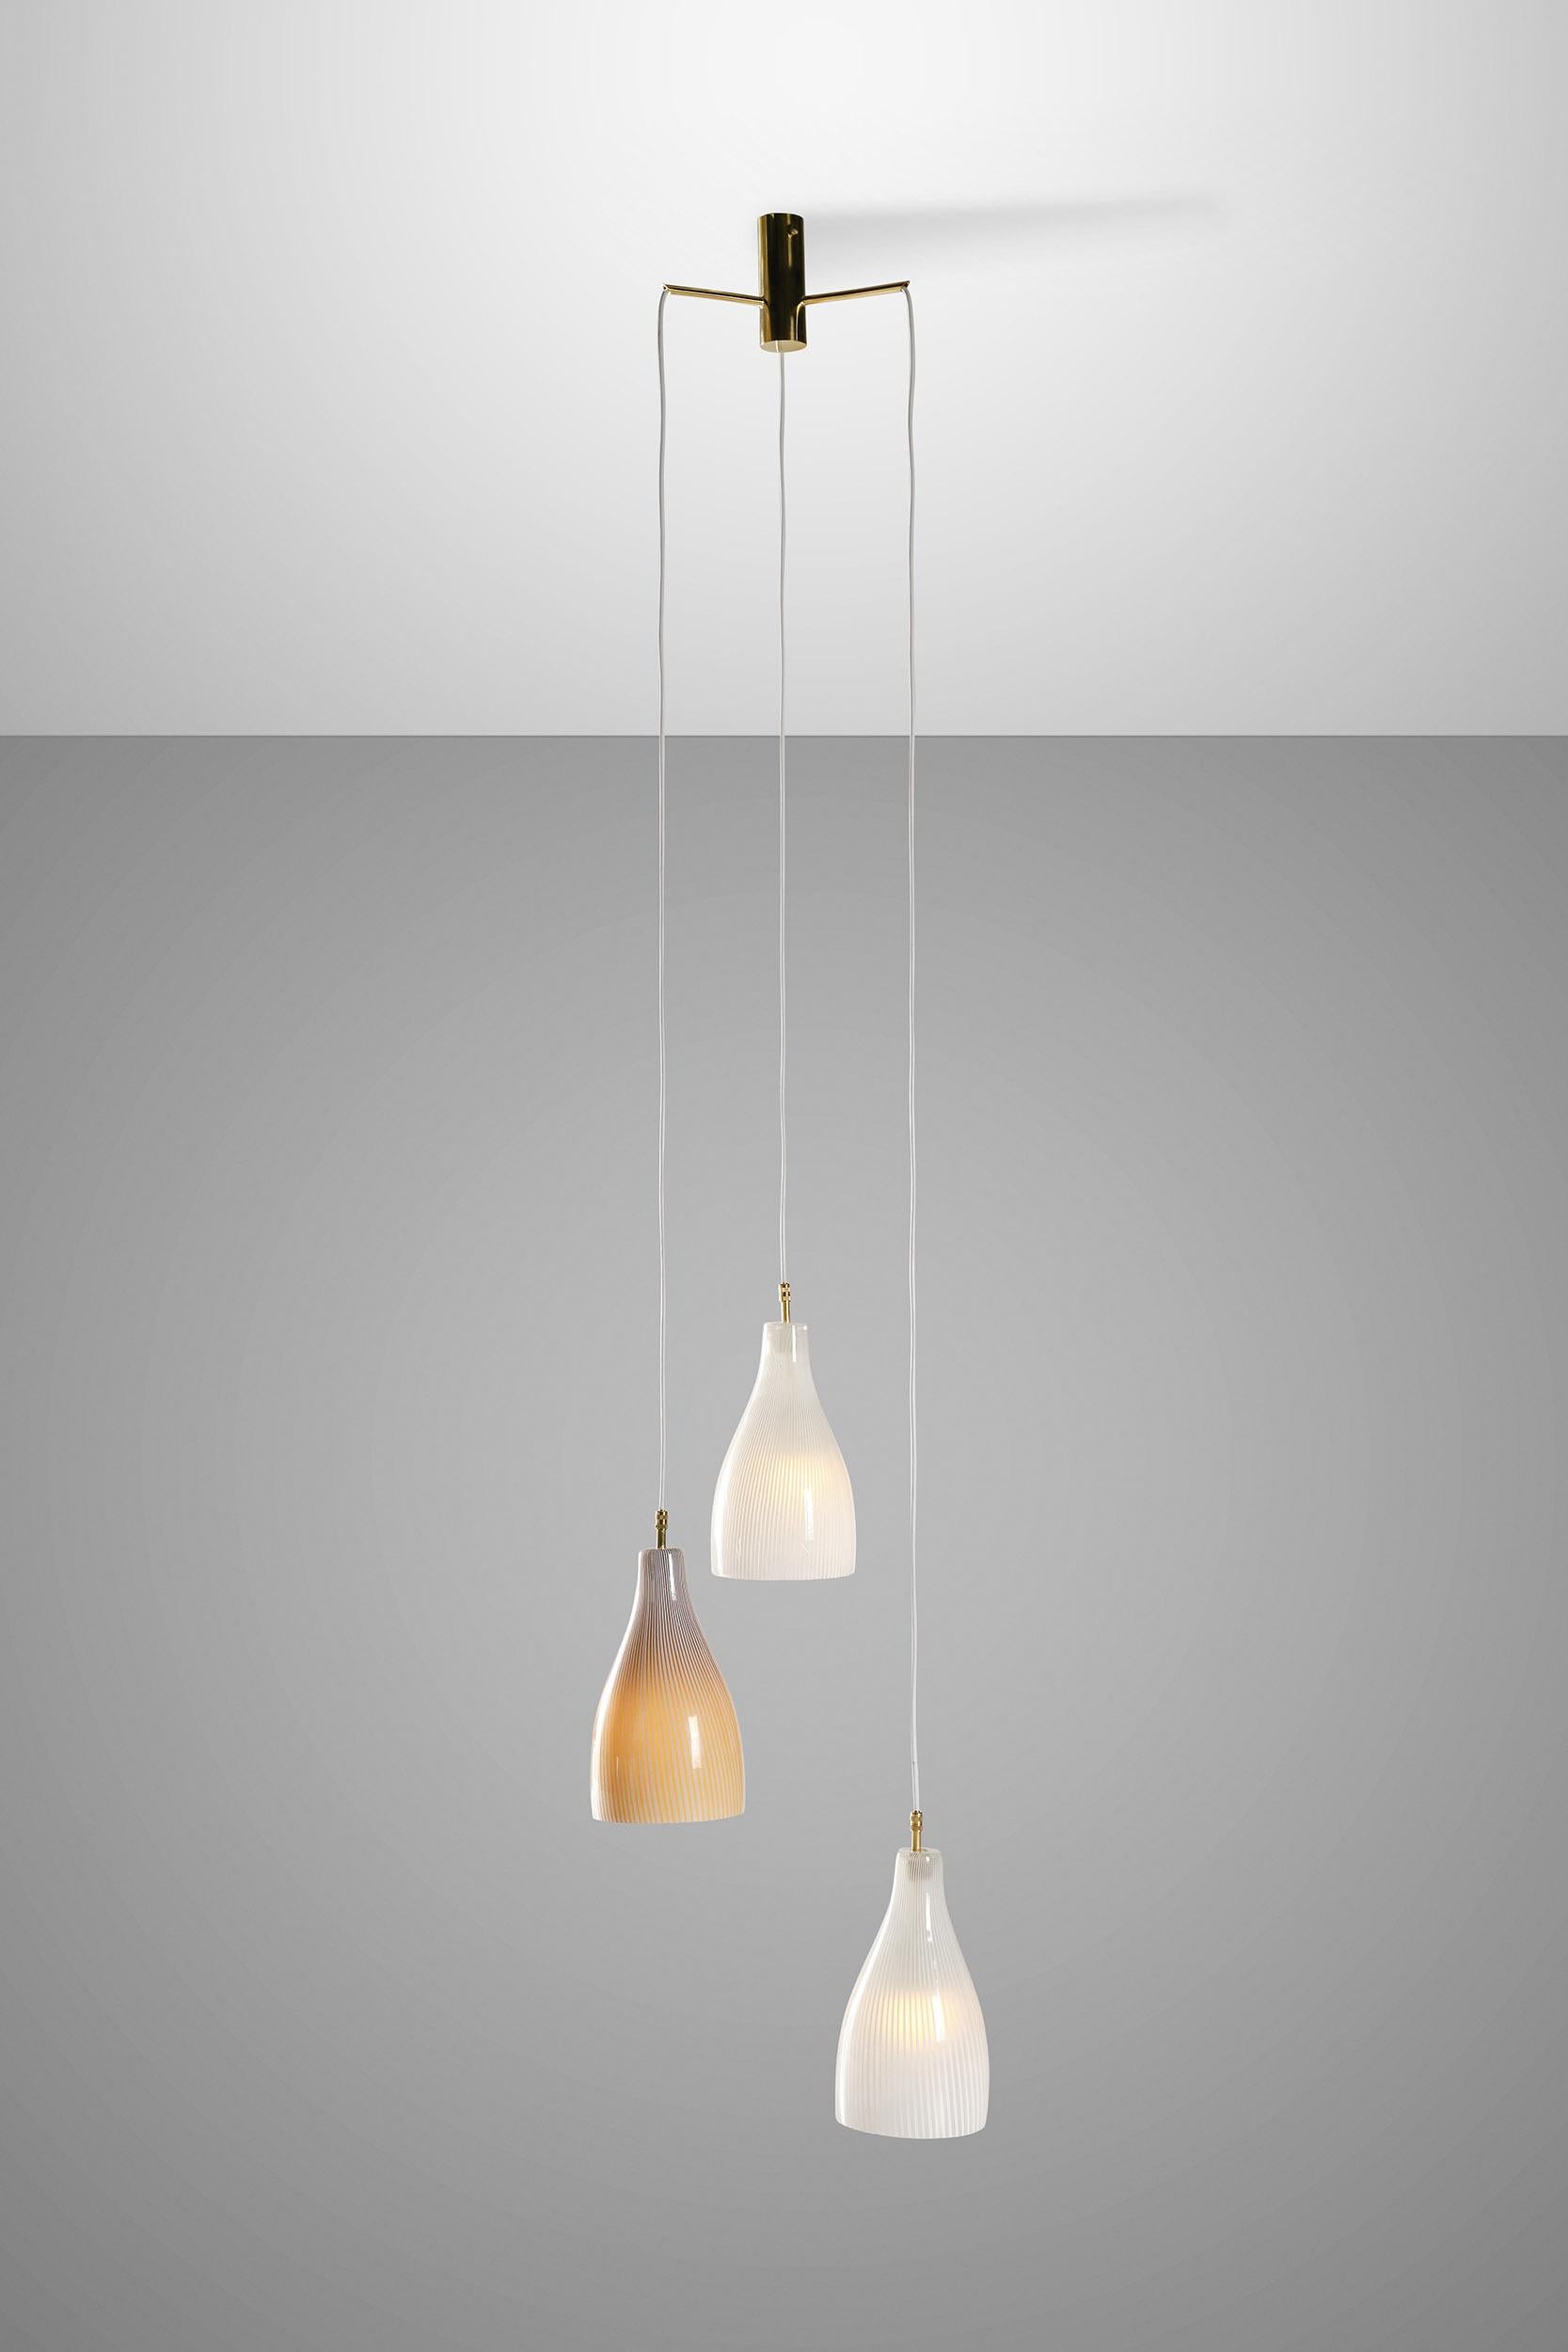 This mid-century pendant lamp was designed by Massimo Vignelli for Venini in the 1960s and features 3 exceptionally refined Murano glass diffusers mounted on a brass structure.